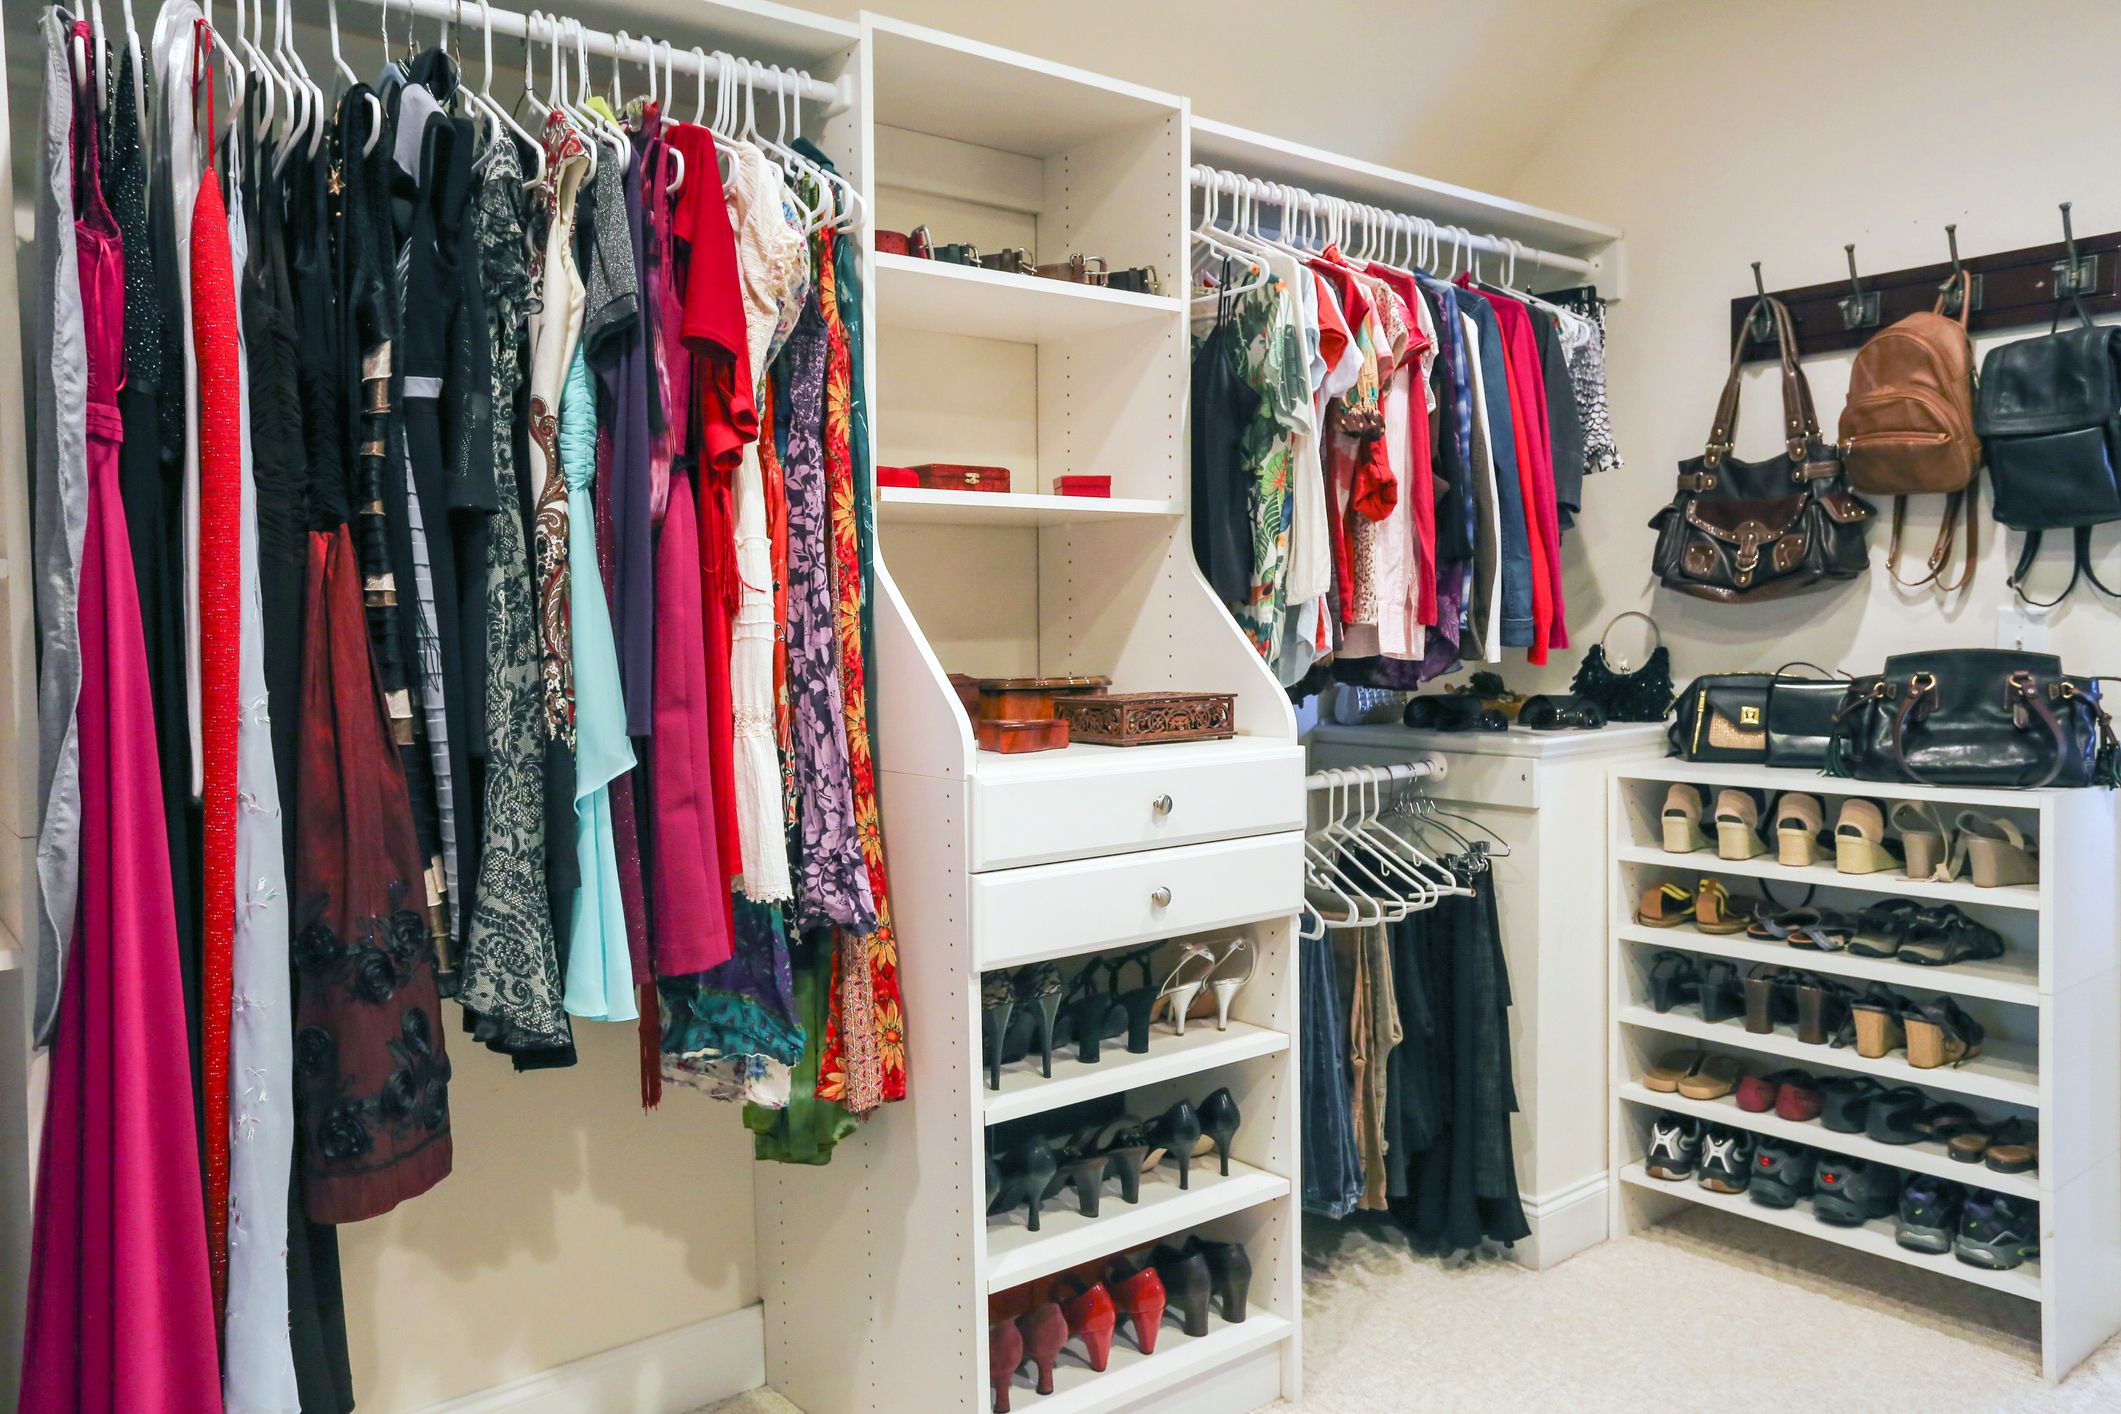 12 Wardrobe Storage Ideas for Luxury Shoes & Bags